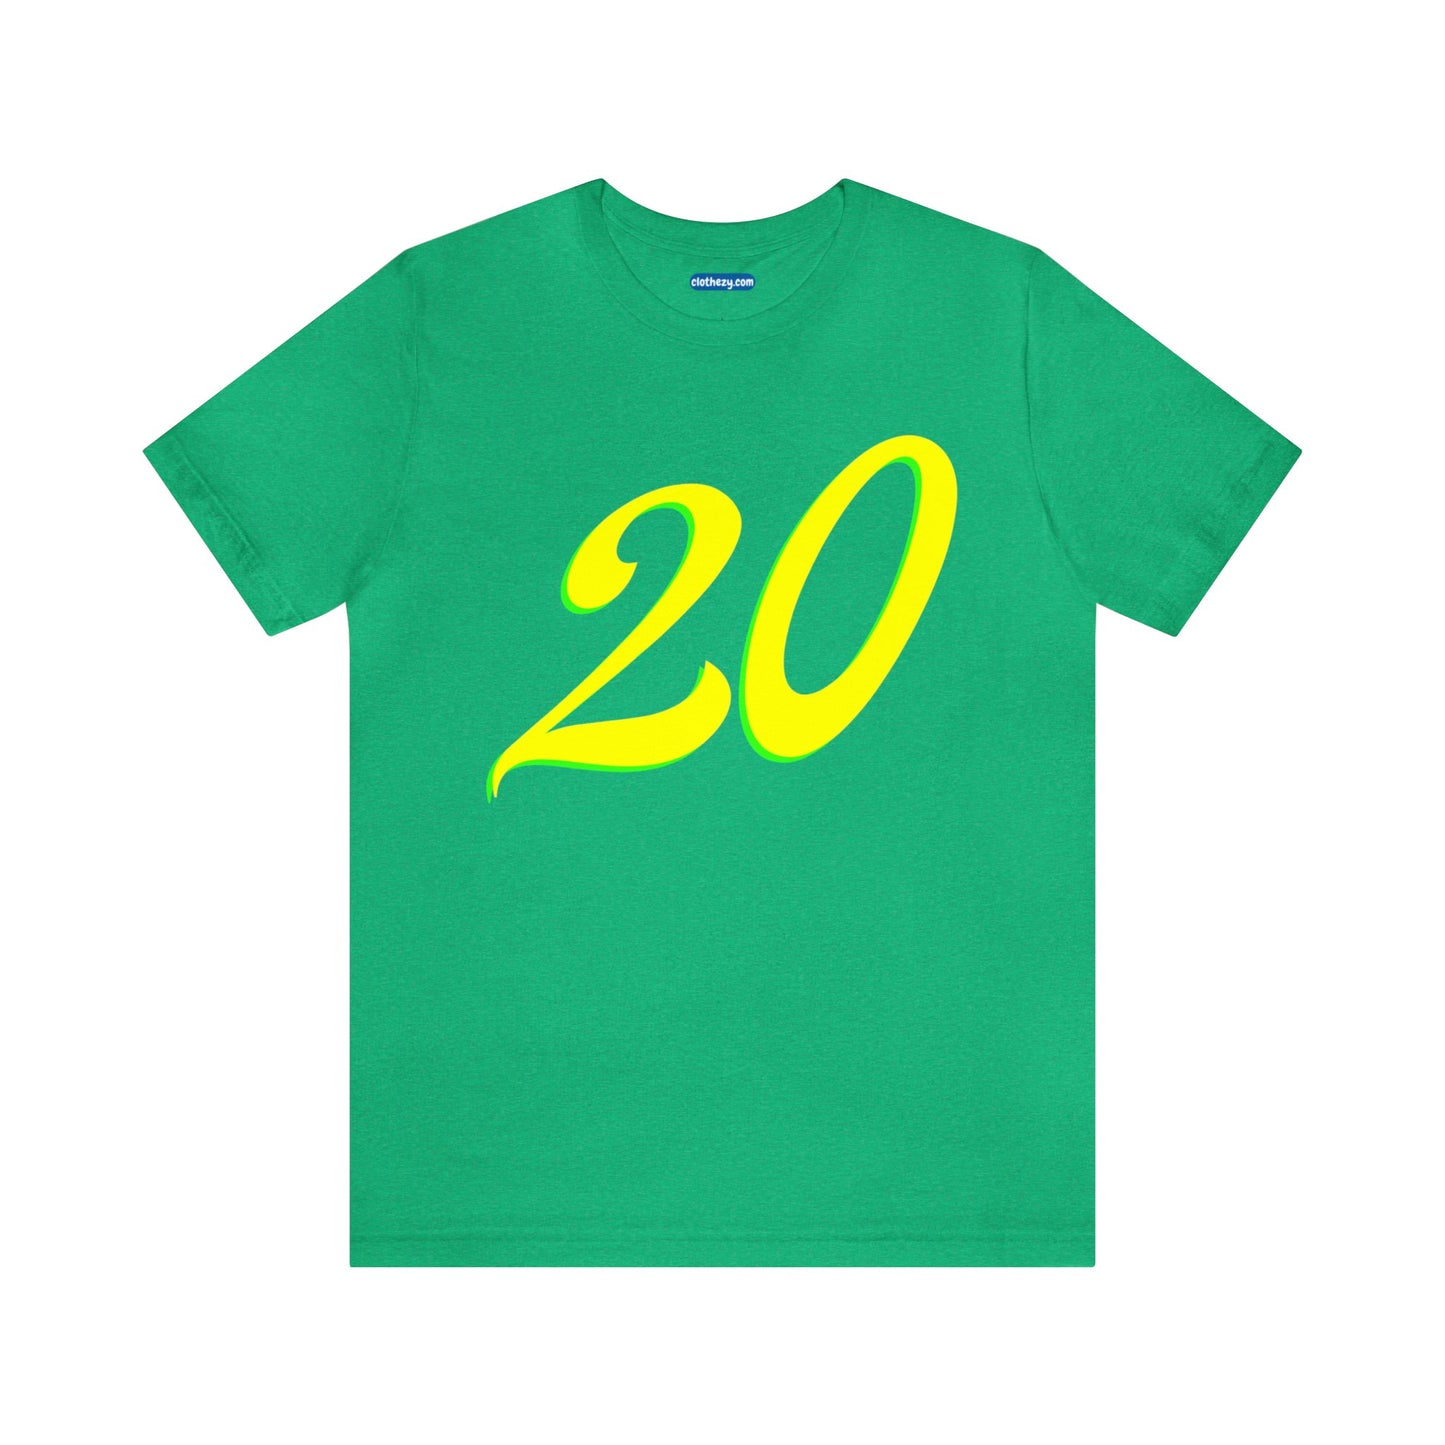 Number 20 Design - Soft Cotton Tee for birthdays and celebrations, Gift for friends and family, Multiple Options by clothezy.com in Royal Blue Heather Size Small - Buy Now